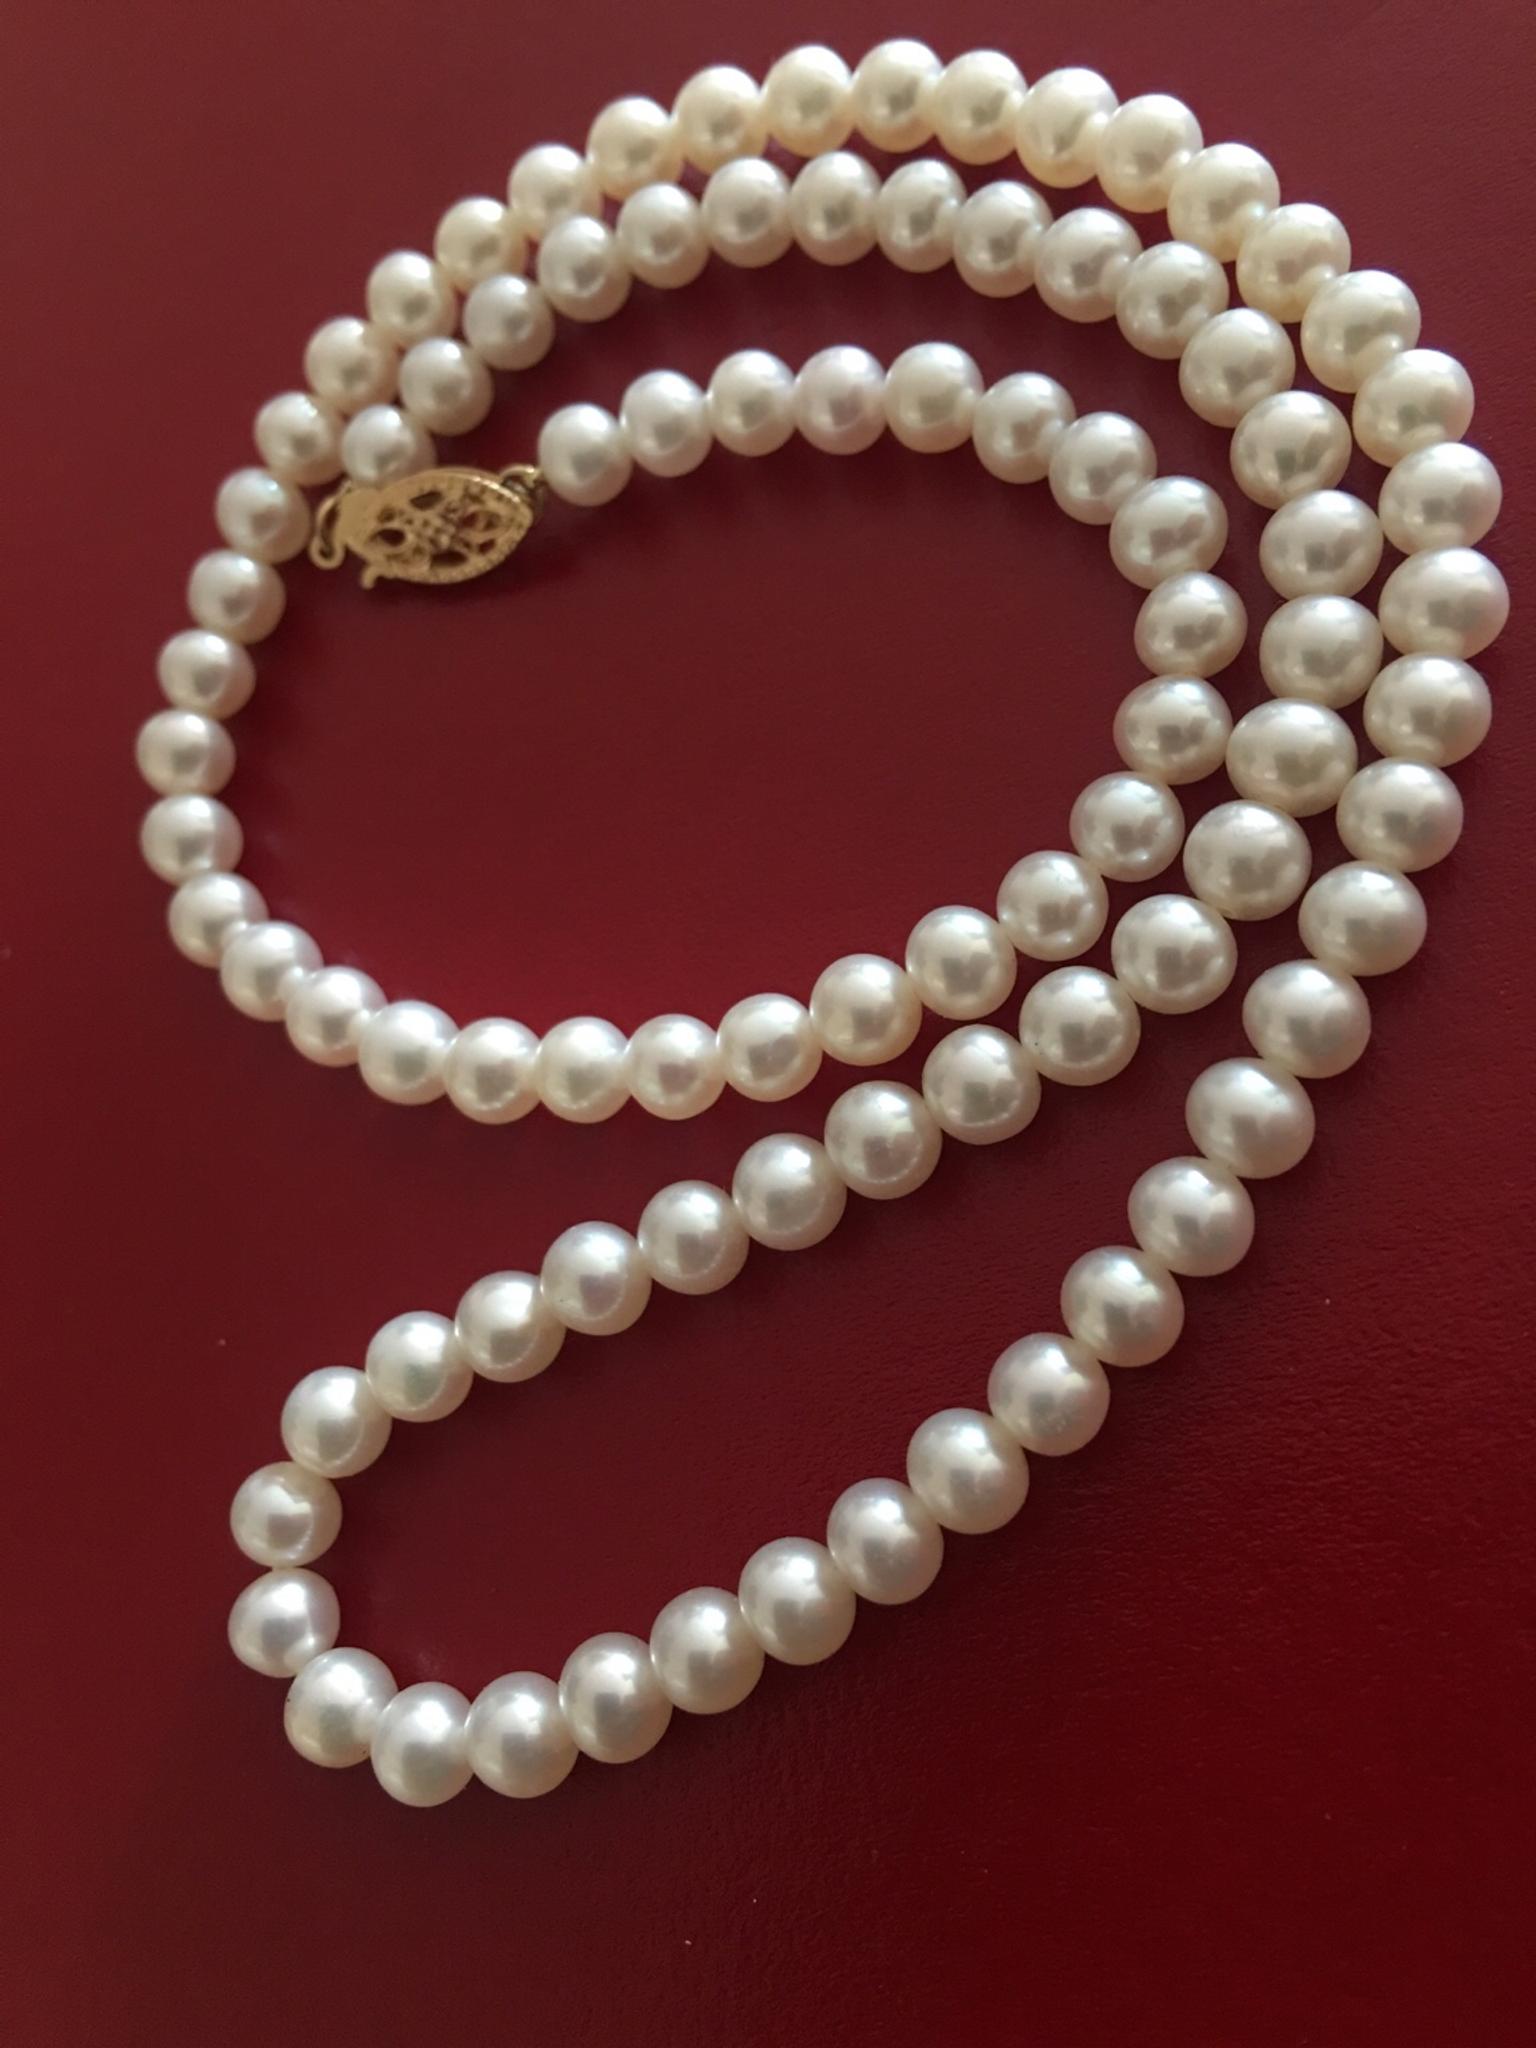 Genuine pearls necklace 9ct gold clasp in RM8 Dagenham for £27.00 for